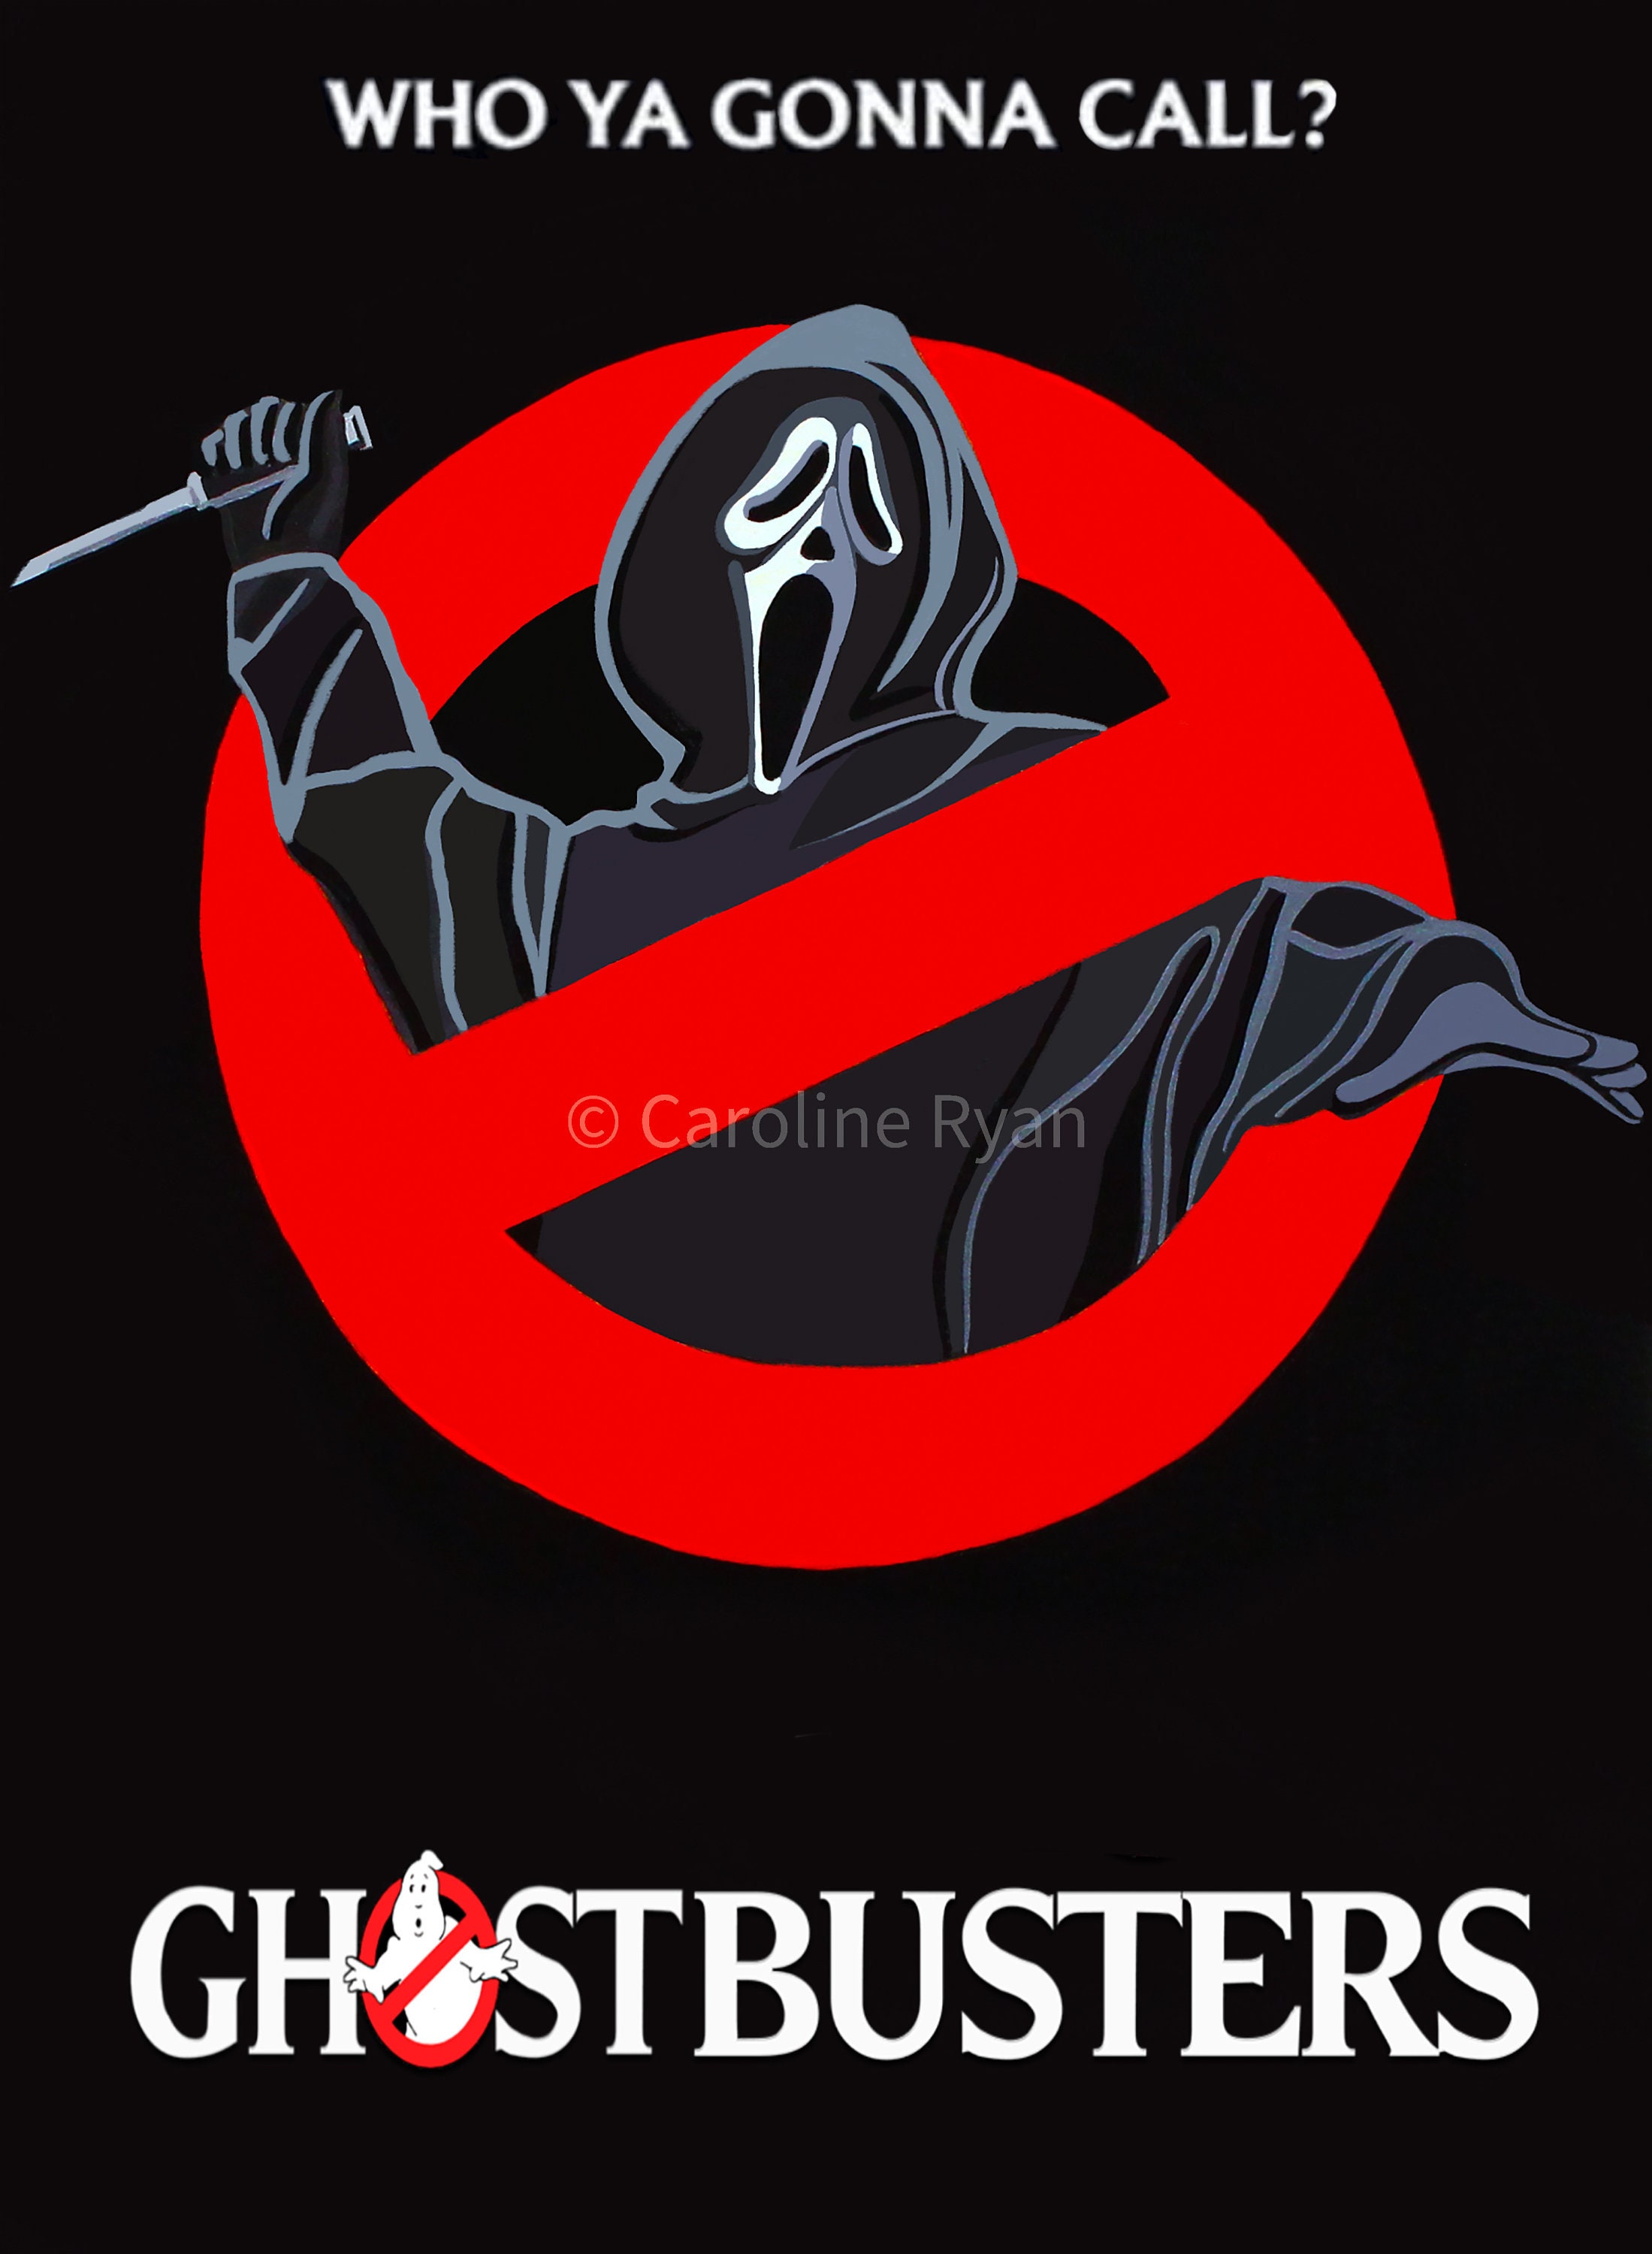 Poster GHOSTBUSTERS - logo, Wall Art, Gifts & Merchandise